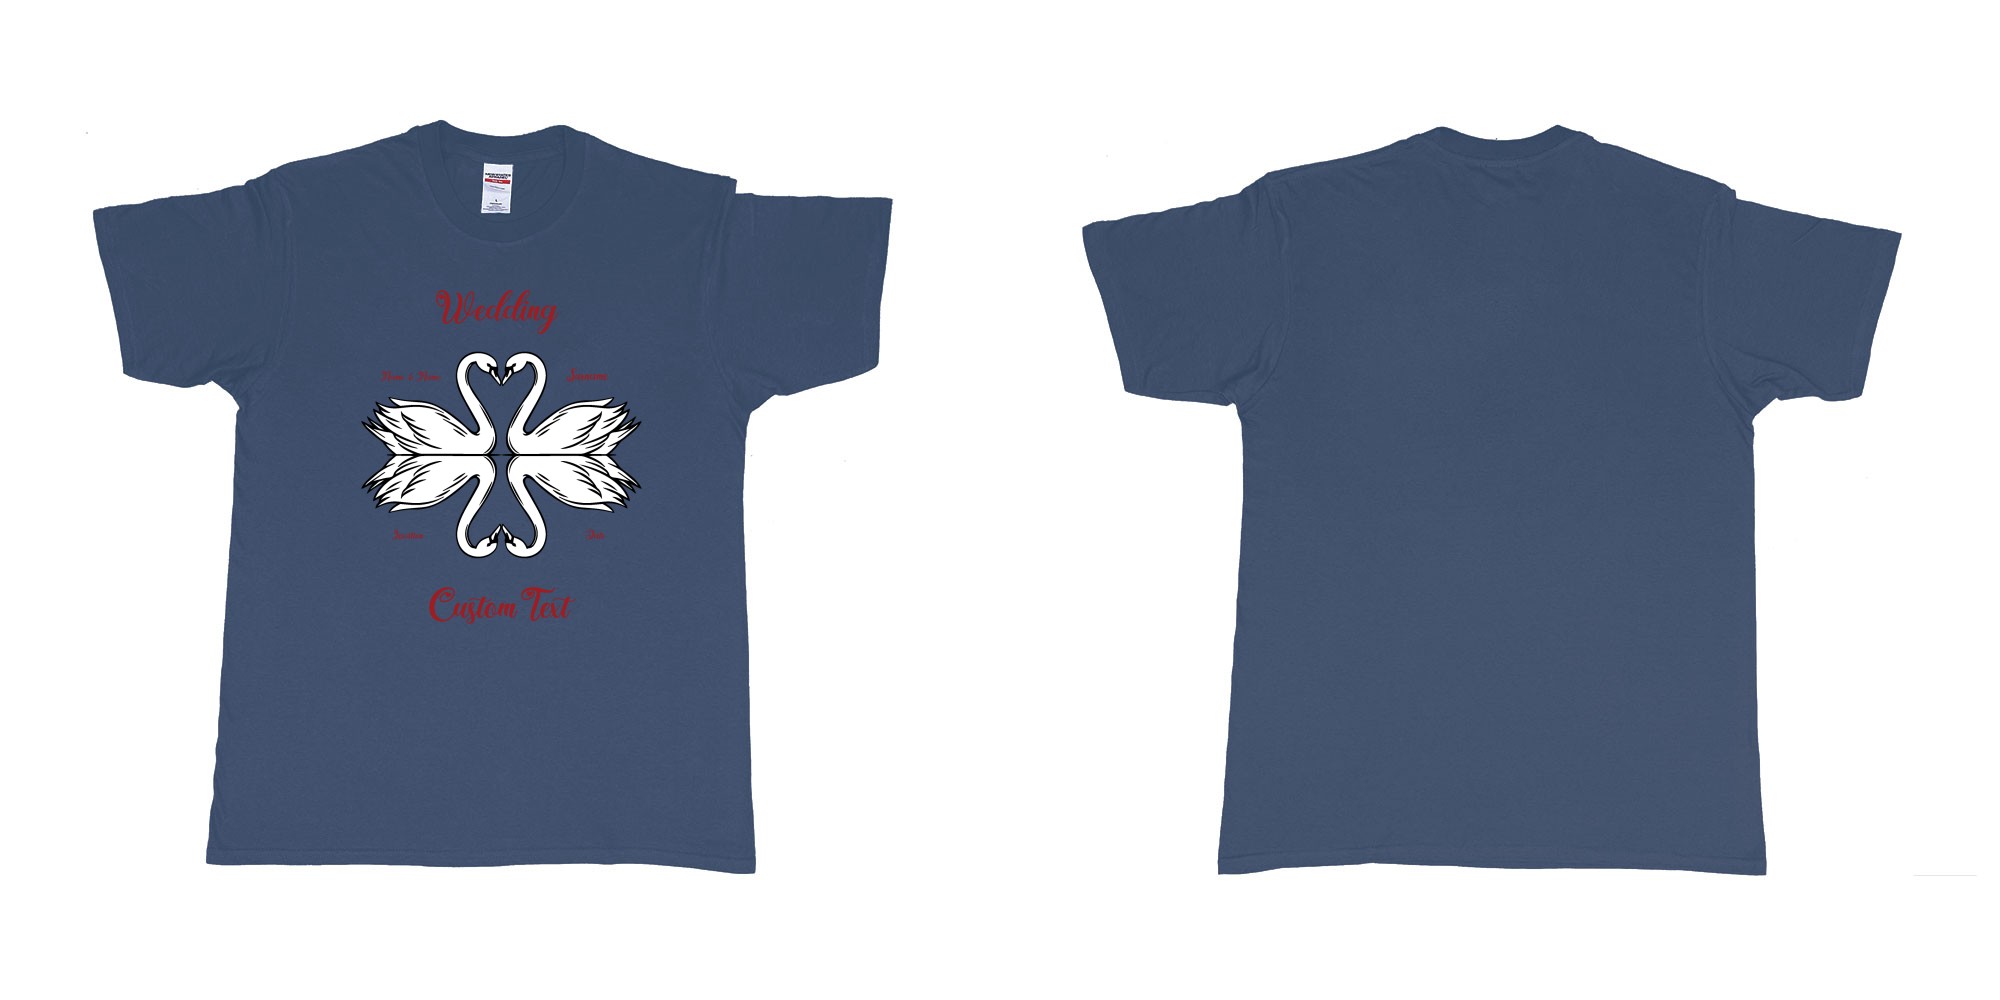 Custom tshirt design swans hearts reflection in fabric color navy choice your own text made in Bali by The Pirate Way